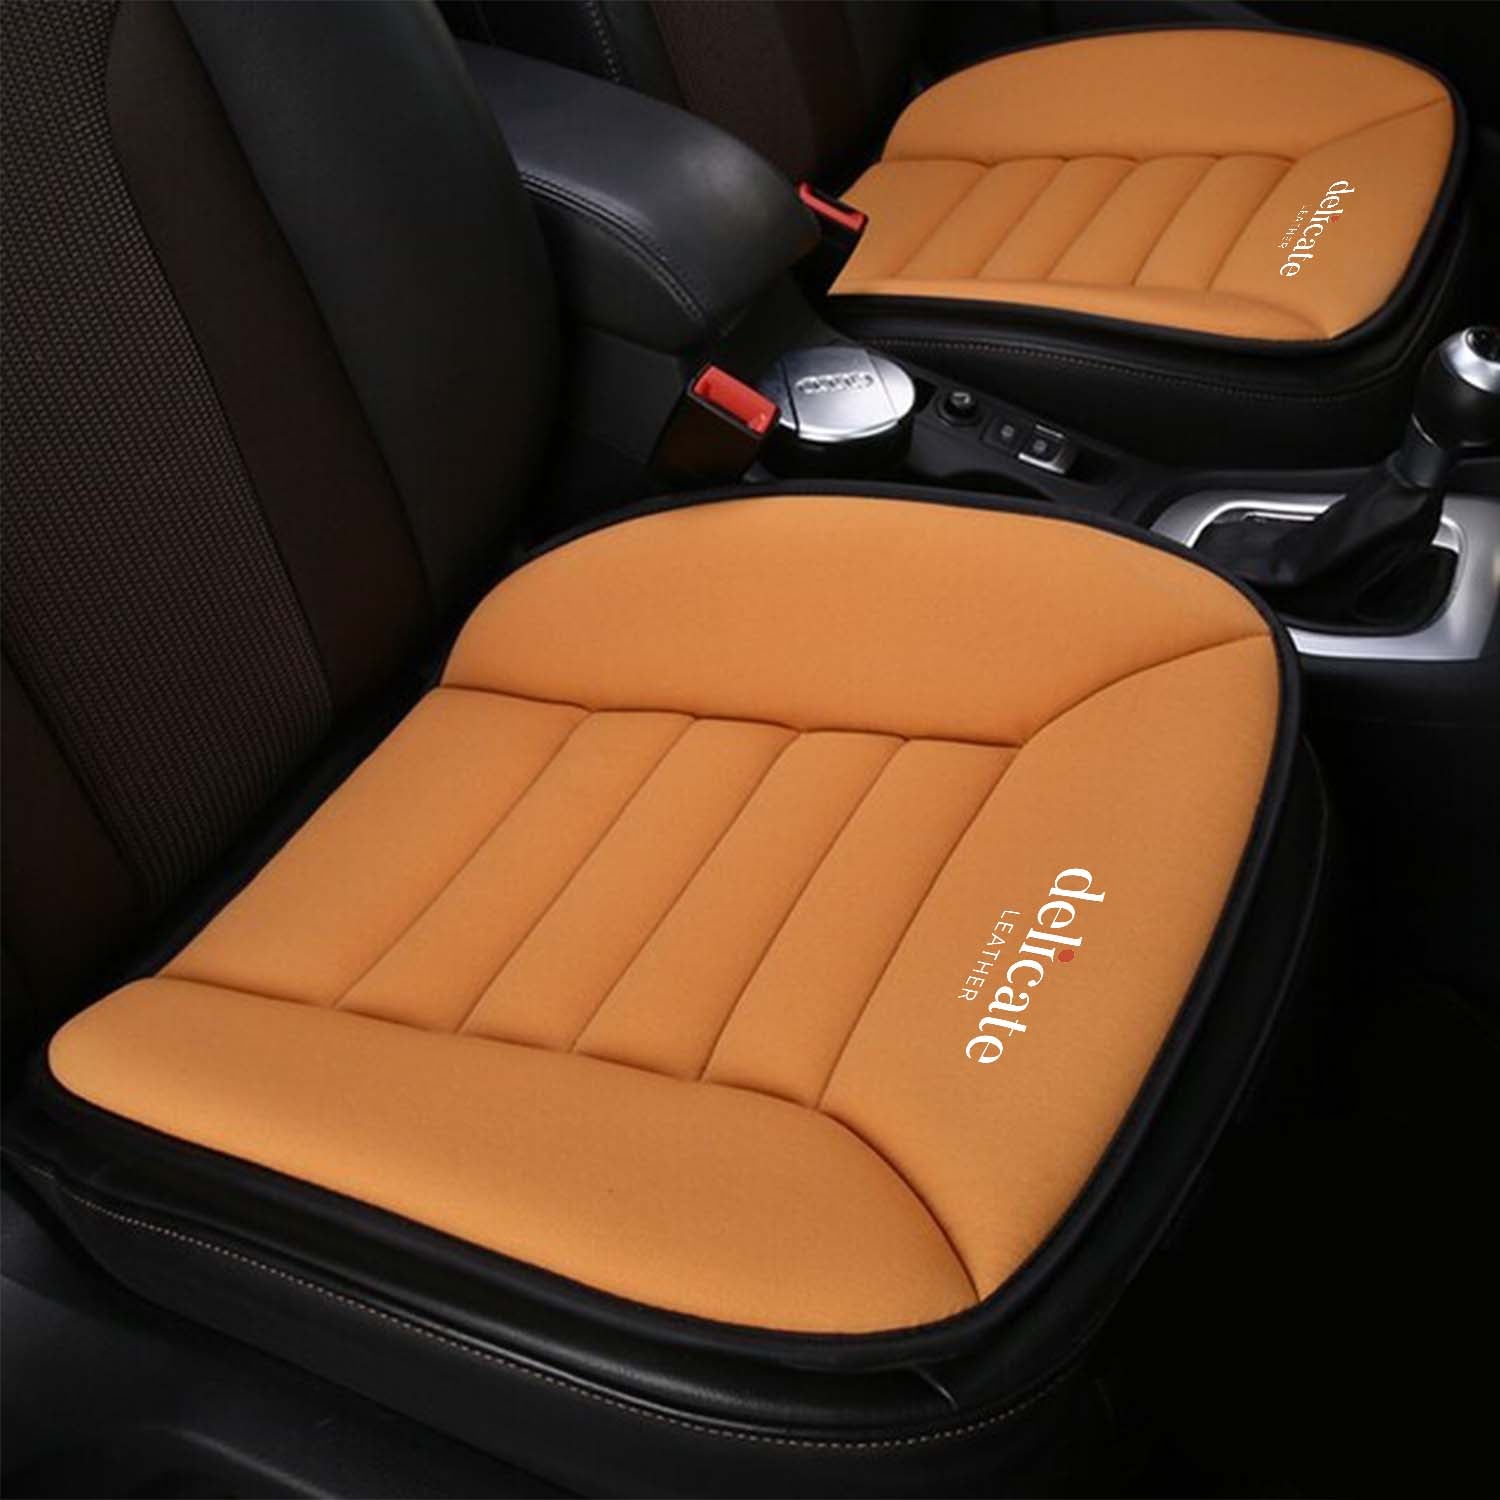 Mini Cooper Car Seat Cushion: Enhance Comfort and Support for Your Drive